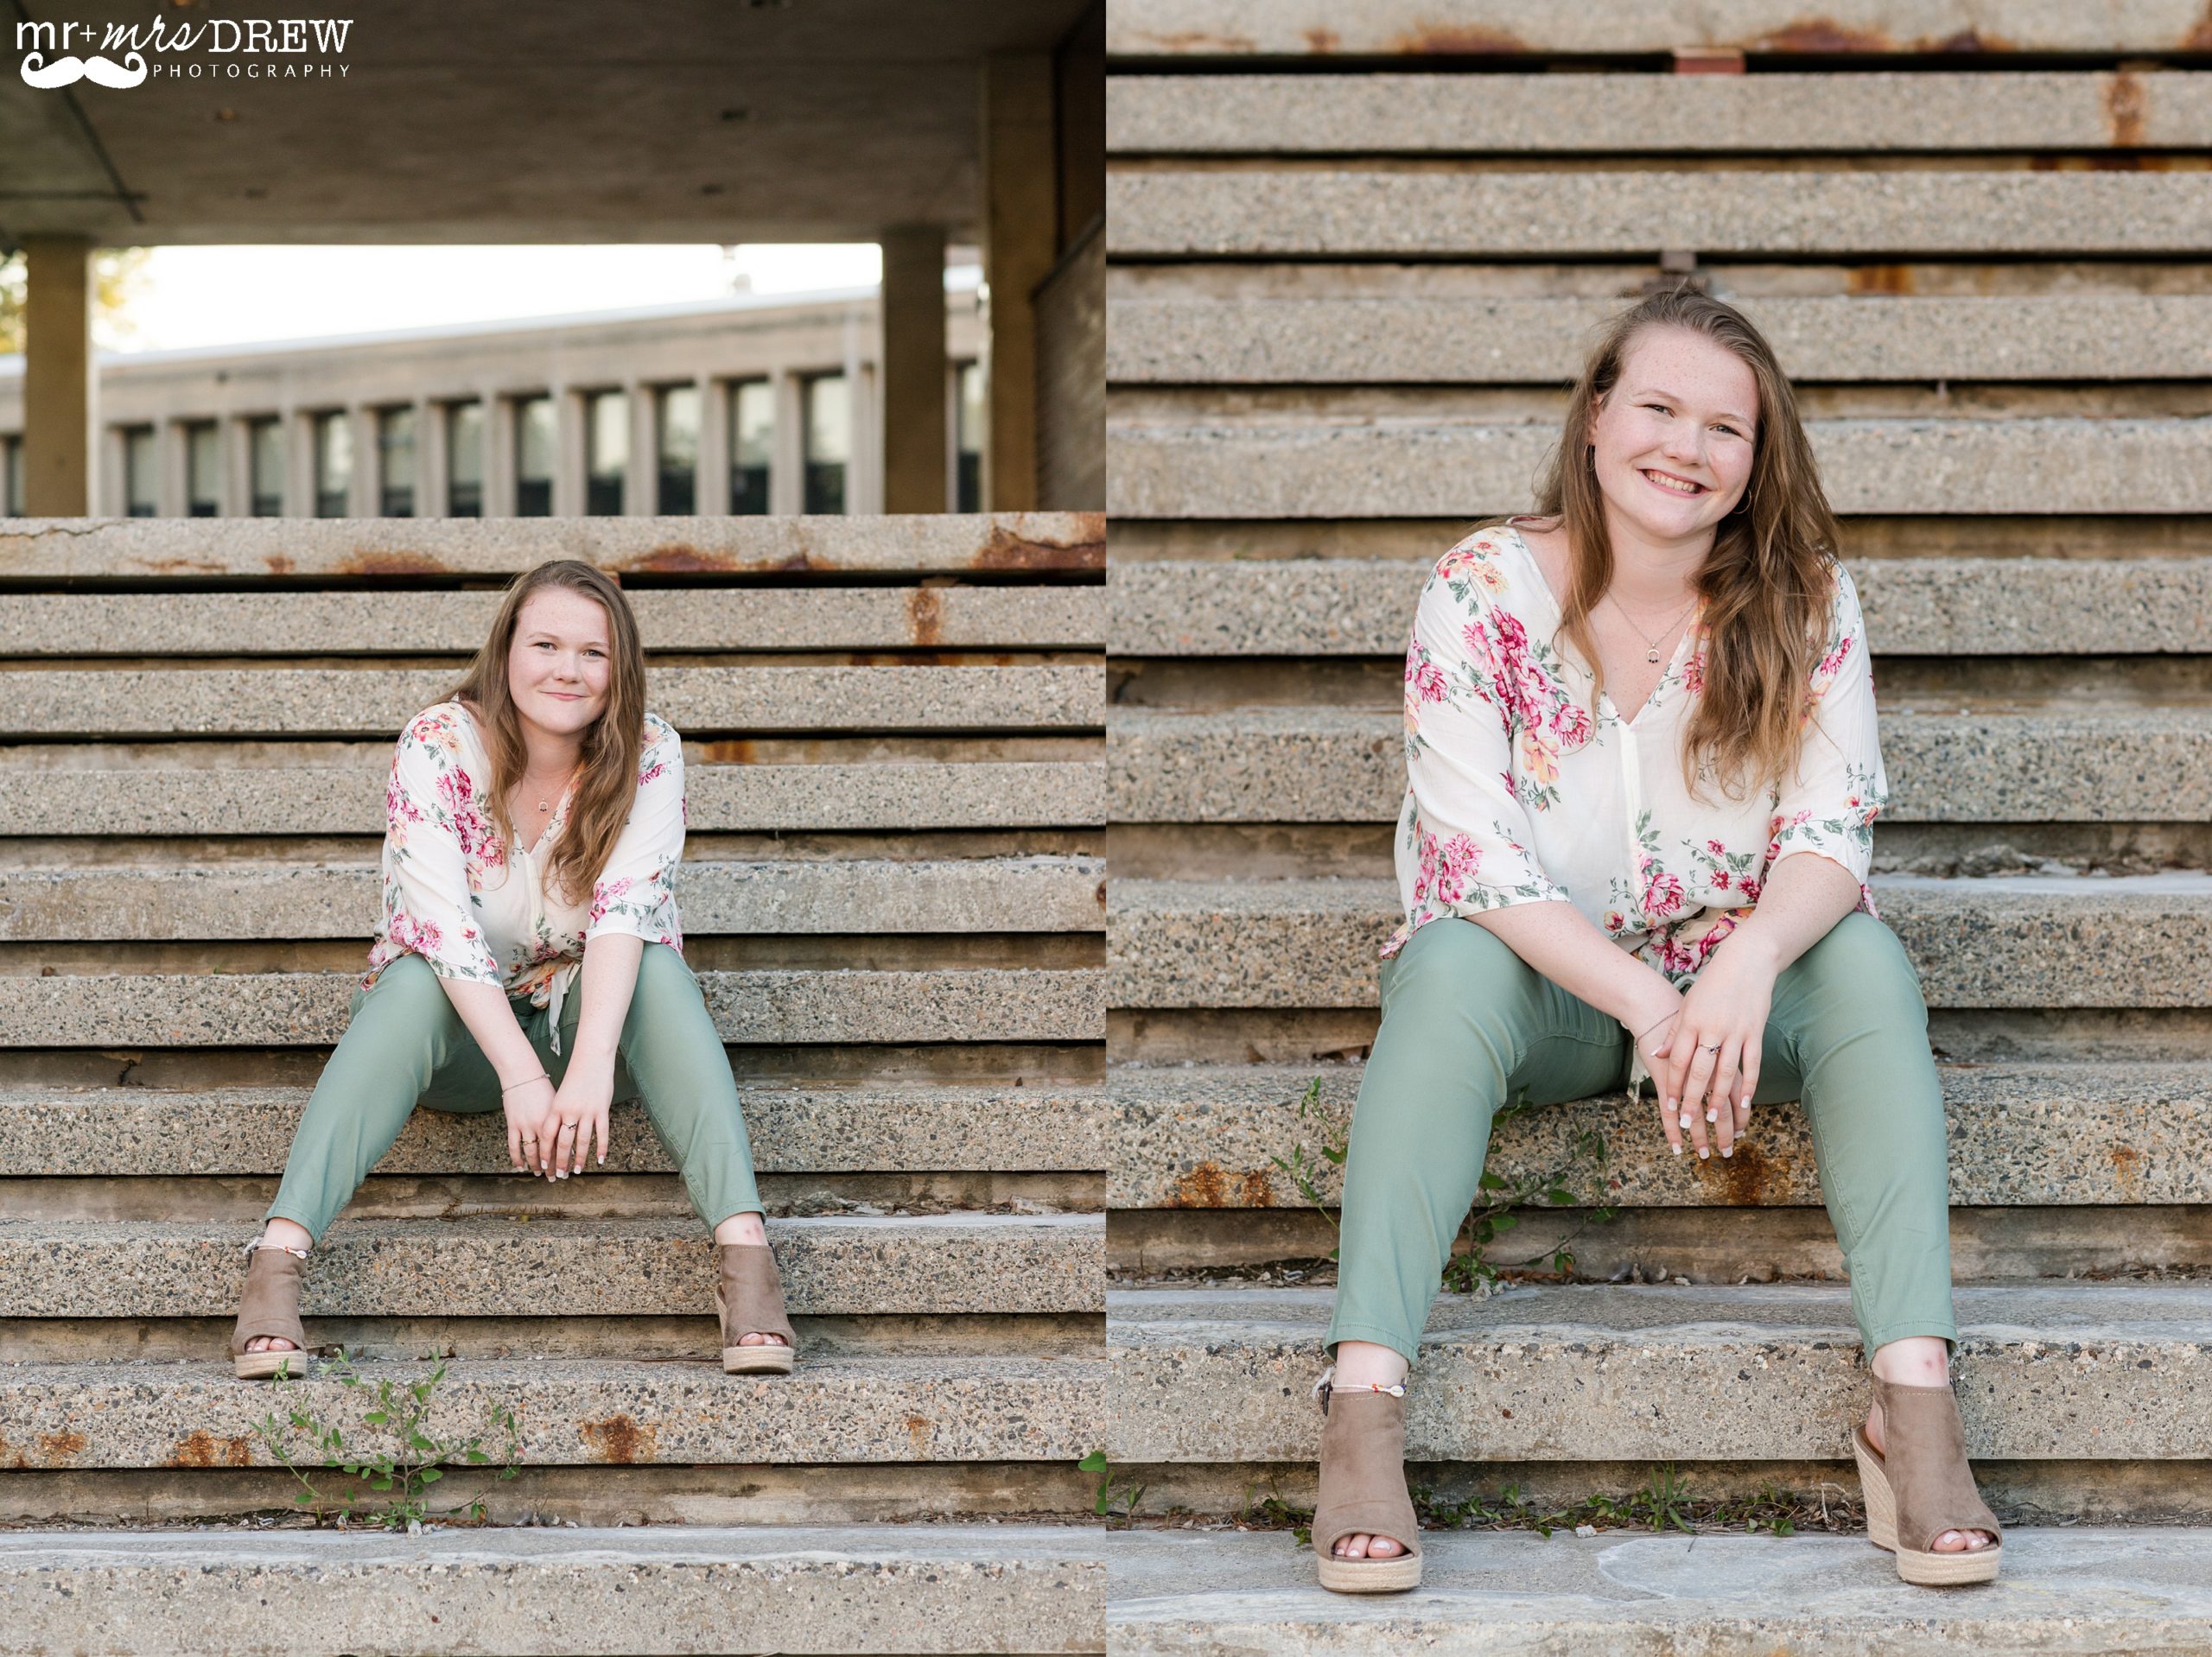 Senior Portraits Downtown Lowell - Meredyth is posing sitting on the stairs.